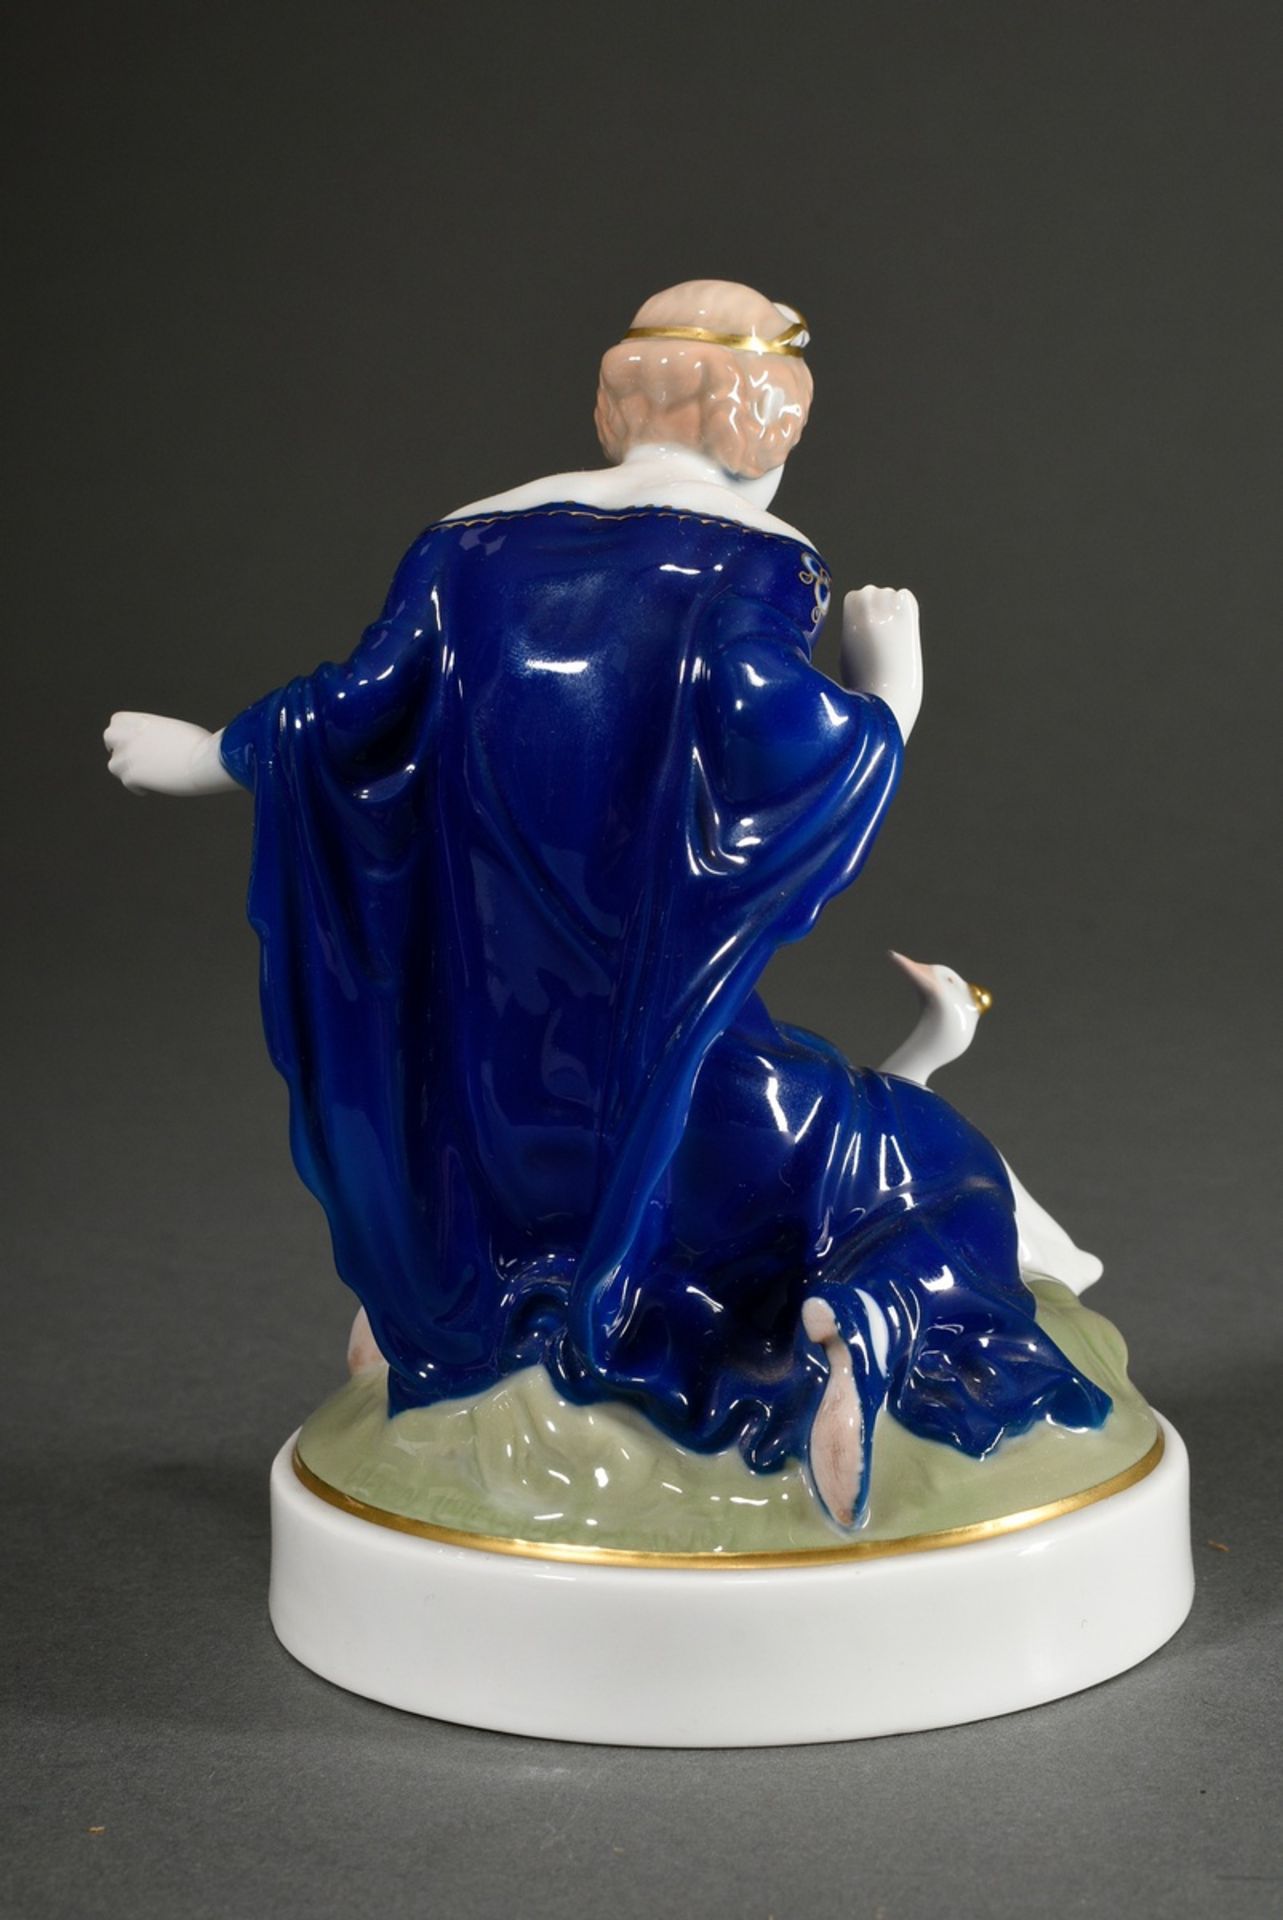 Rosenthal Selb Bavaria porcelain figurine "Princess with golden ball and goose", polychrome painted - Image 3 of 5